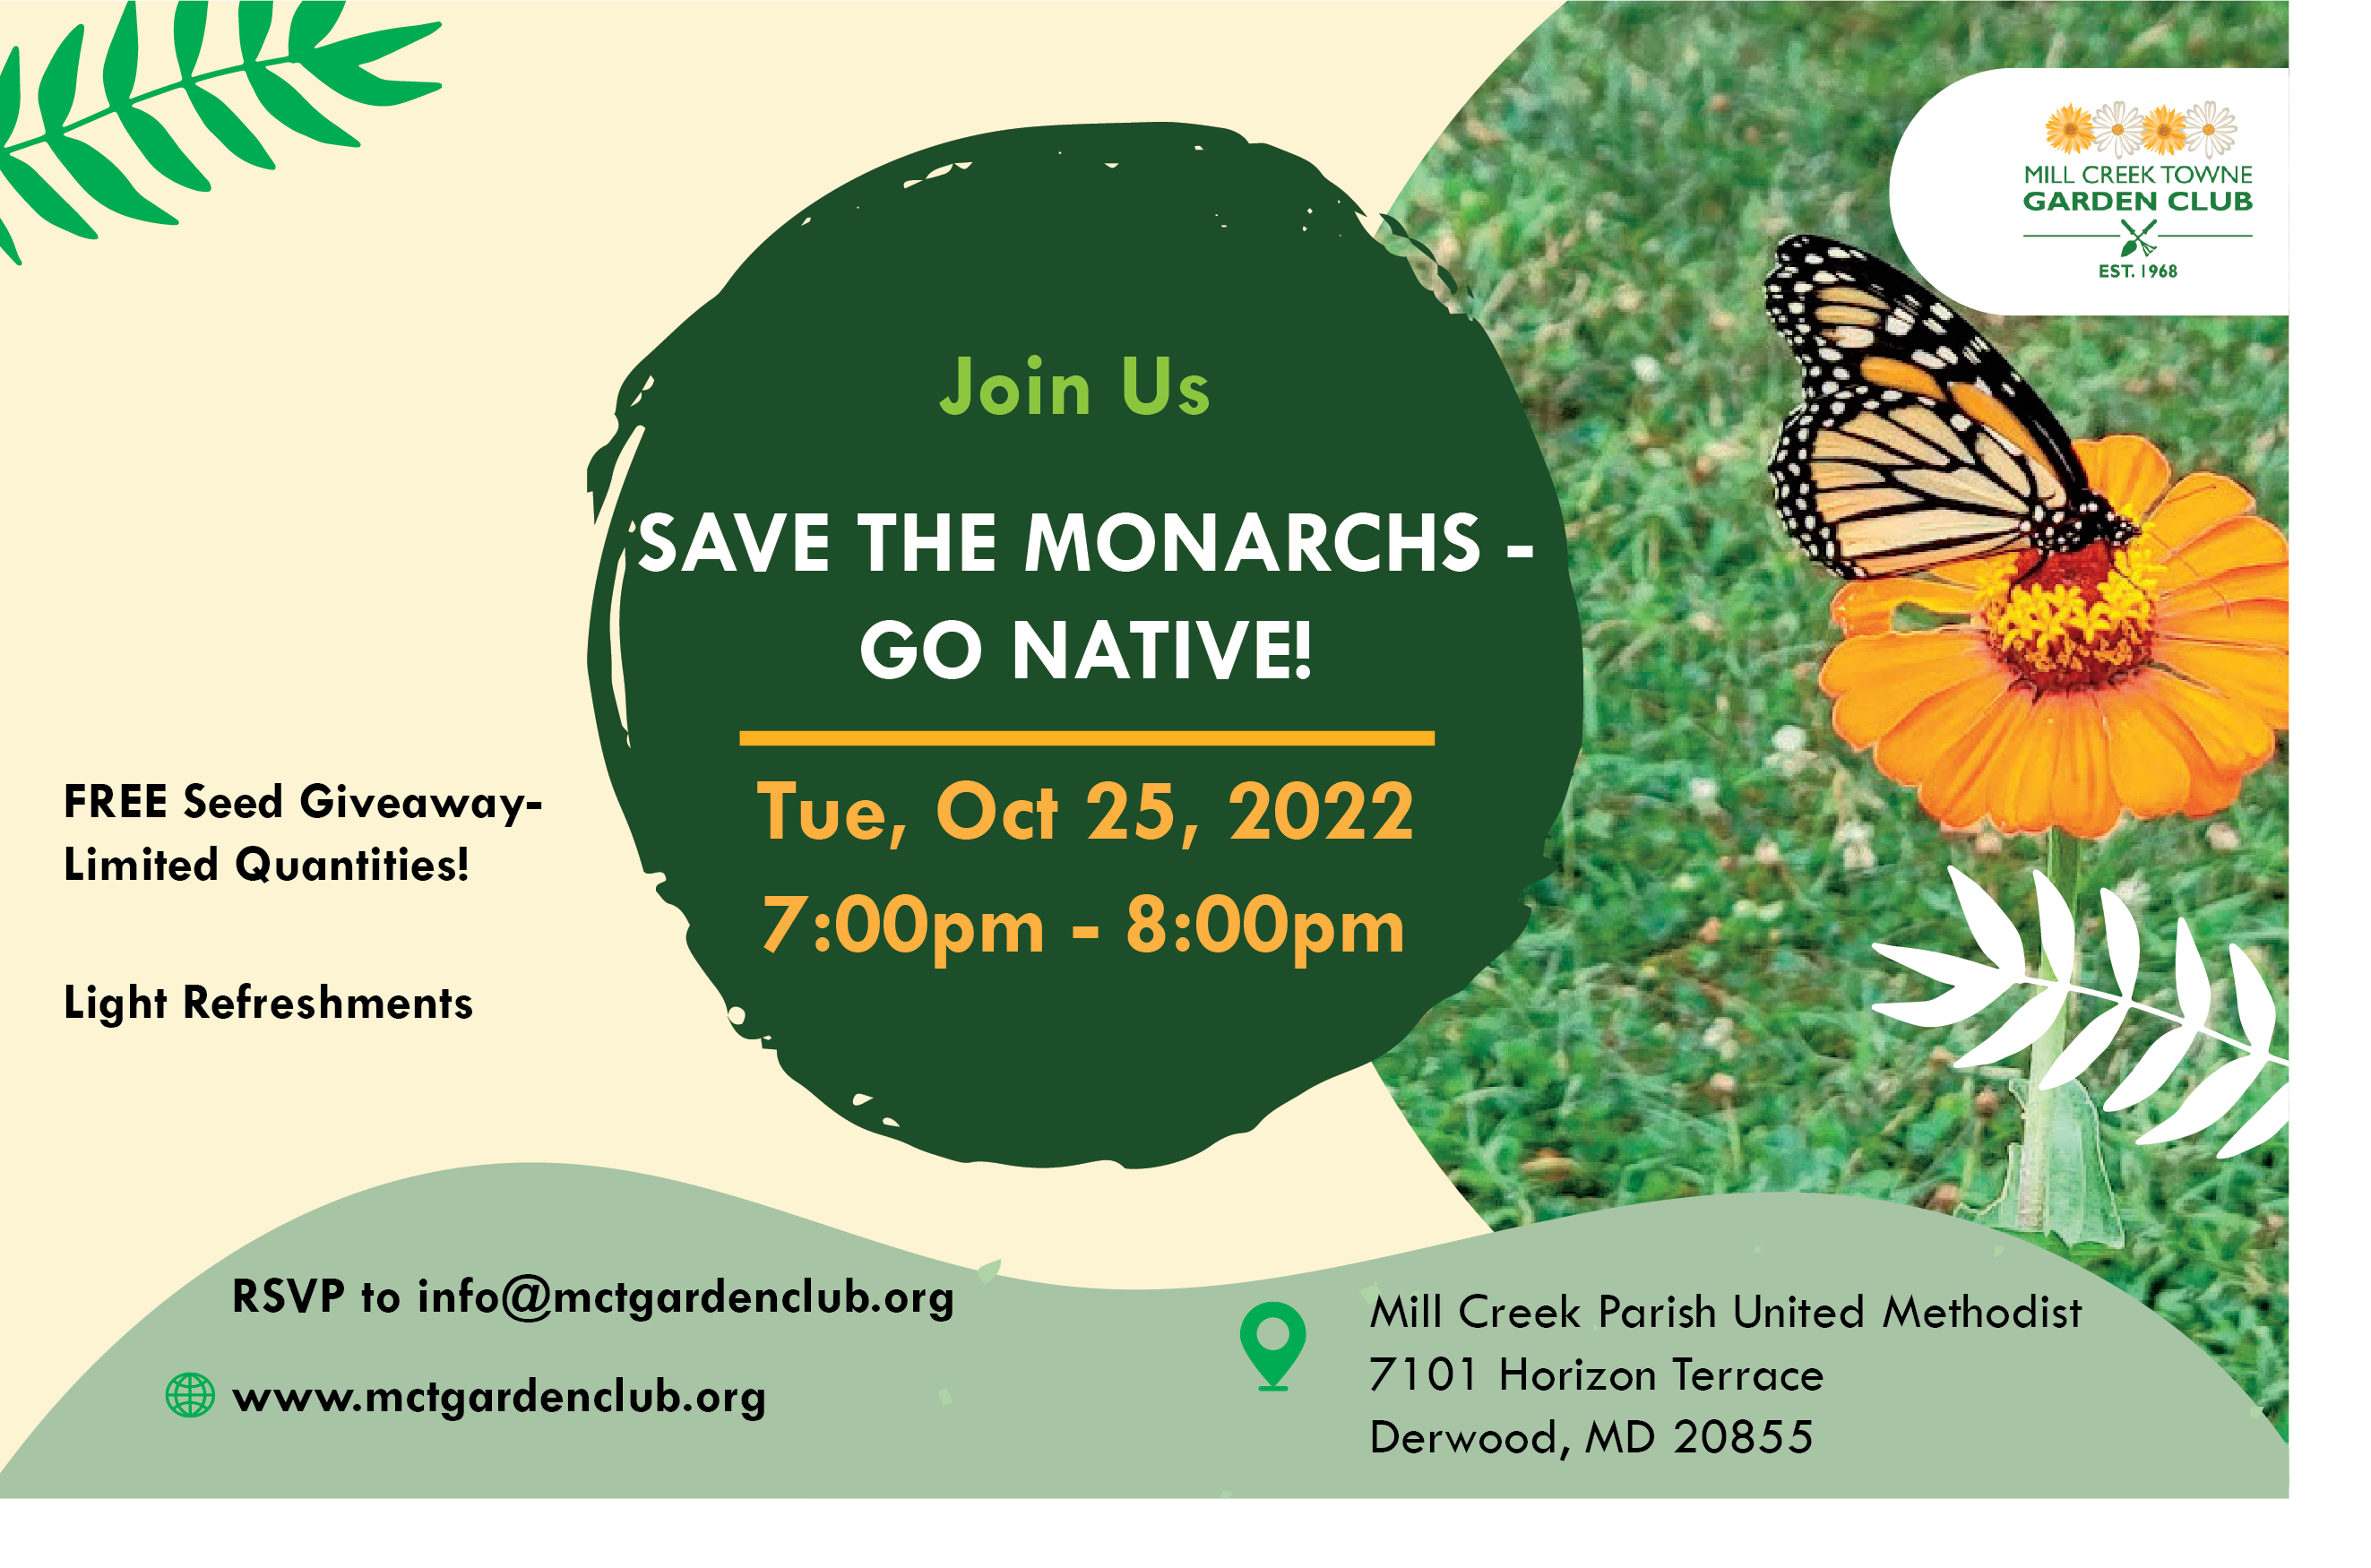 Join-Us-and-Save-the-Monarchs-Tue-Oct-25-2022-event-web